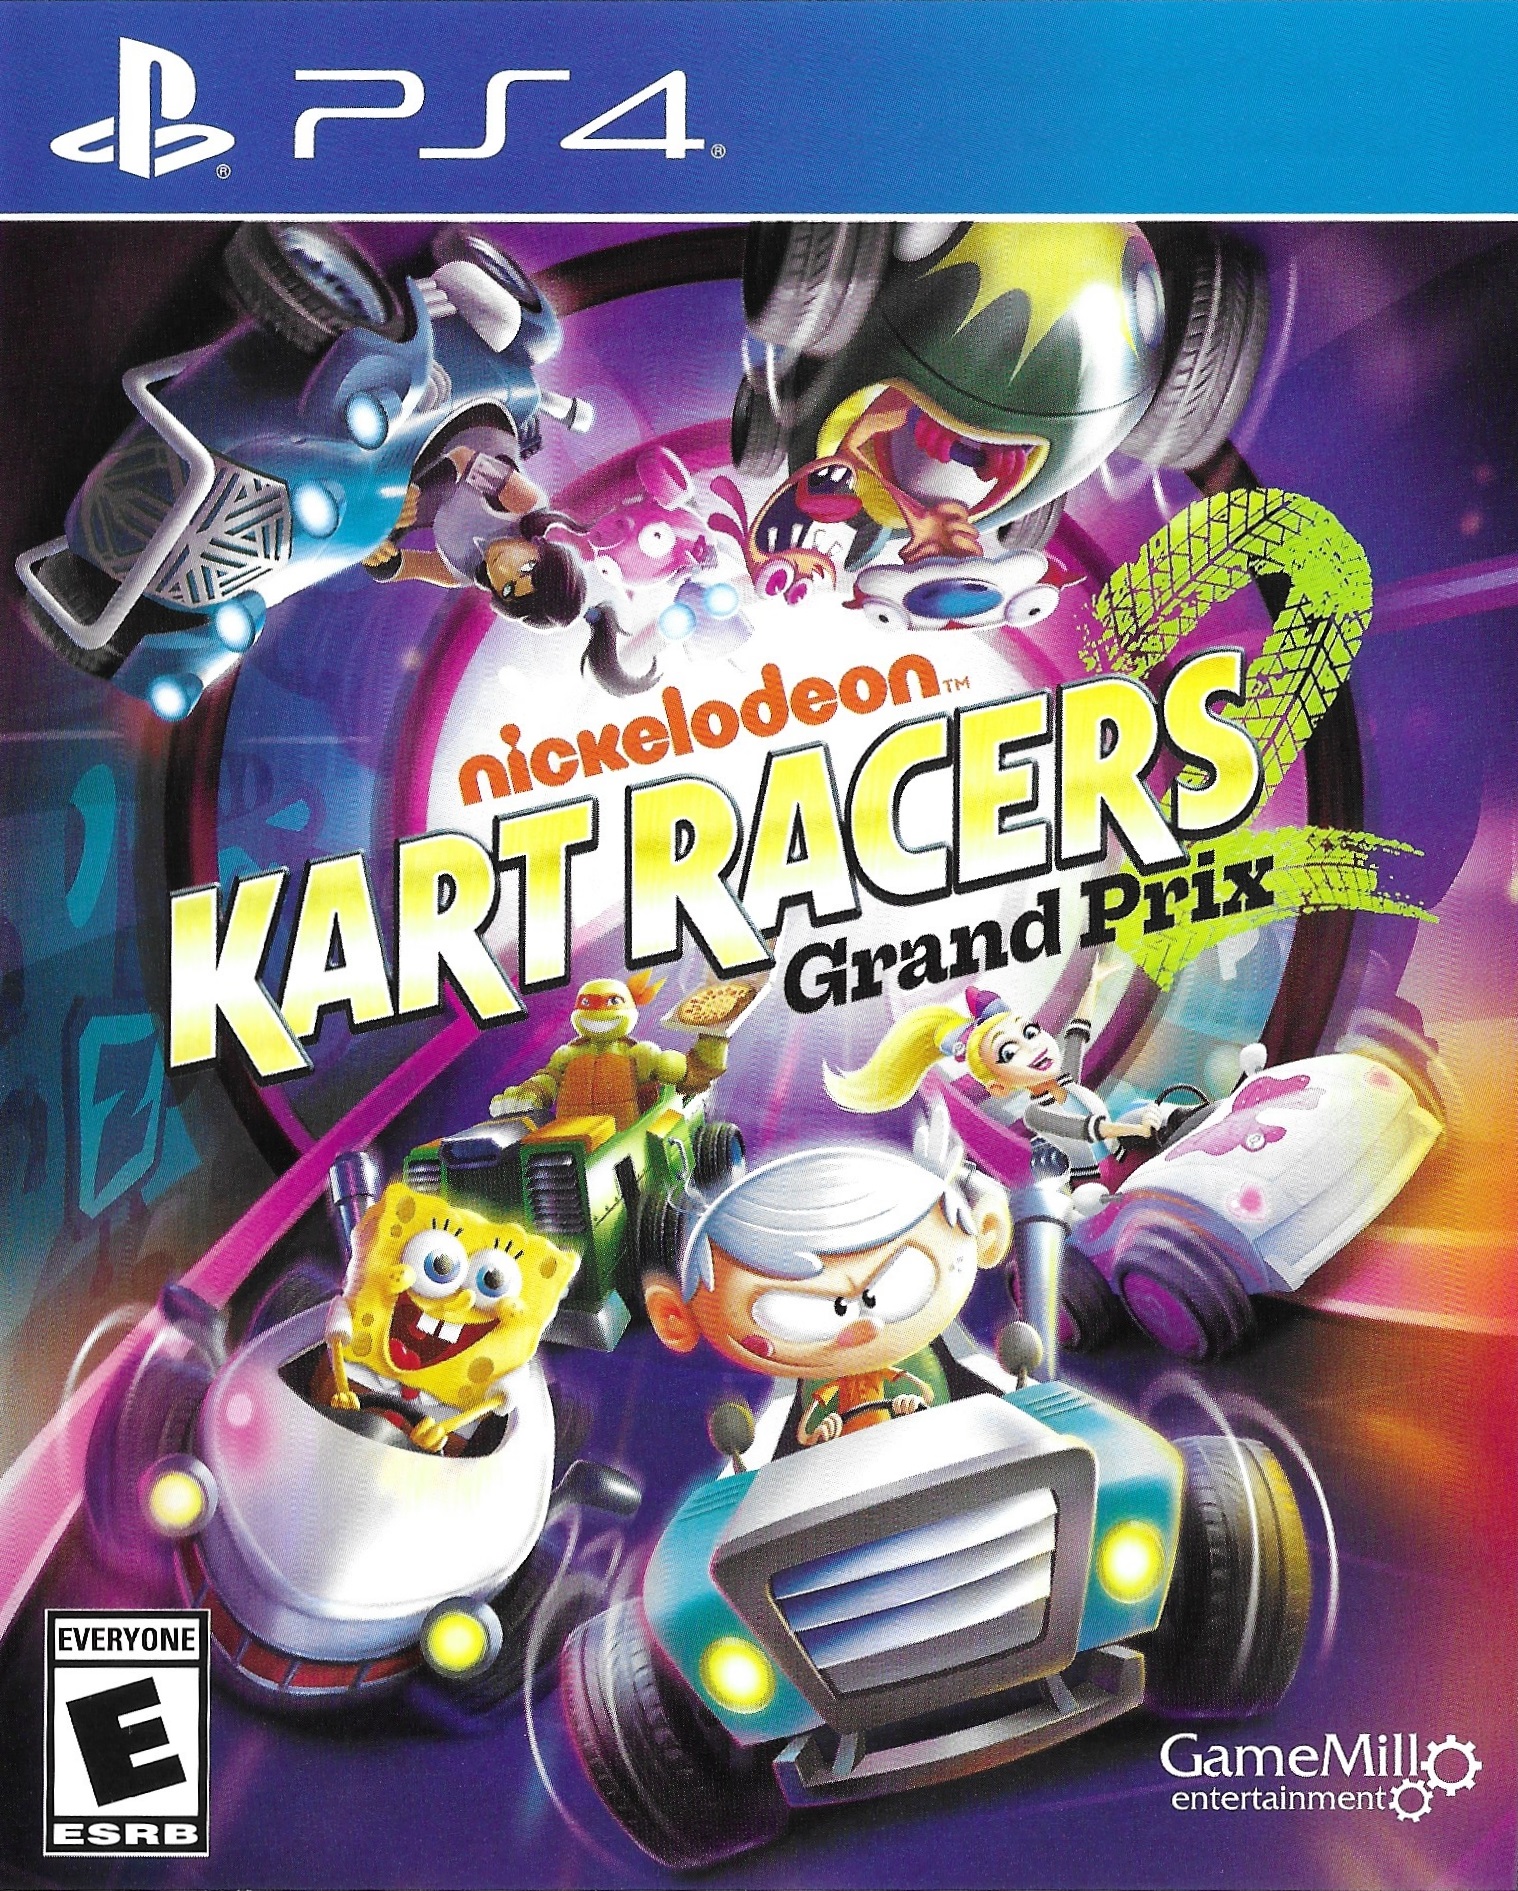 https://static.wikia.nocookie.net/nickelodeon/images/7/79/Nickelodeon_Kart_Racers_2_PS4_cover.jpeg/revision/latest?cb=20210216182957